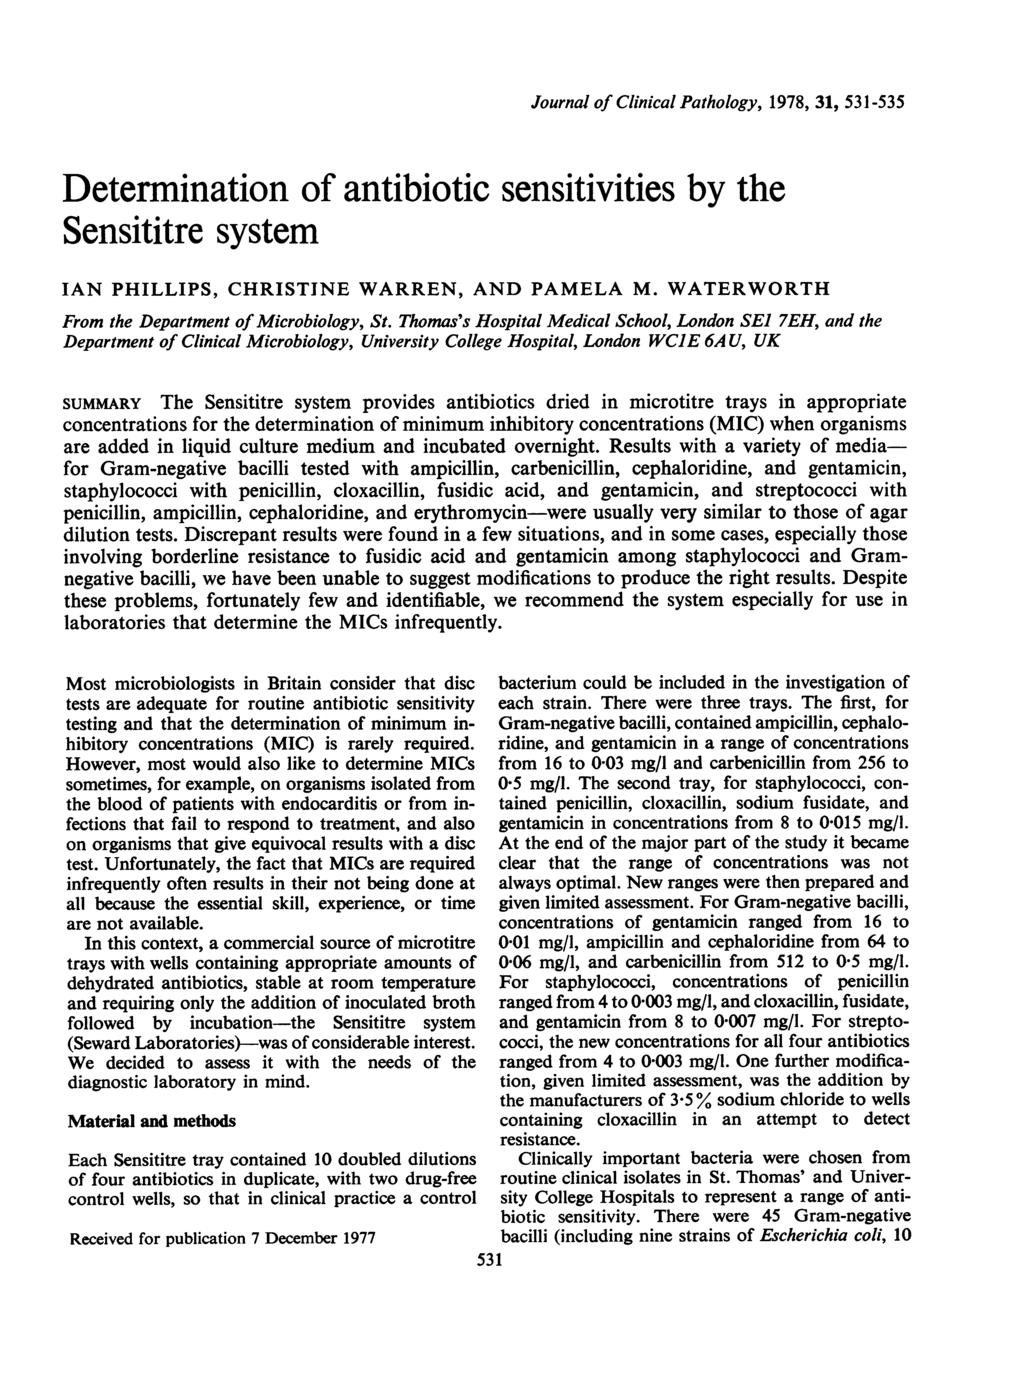 Journal of Clinical Pathology, 1978, 31, 531-535 Determination of antibiotic sensitivities by the Sensititre system IAN PHILLIPS, CHRISTINE WARREN, AND PAMELA M.